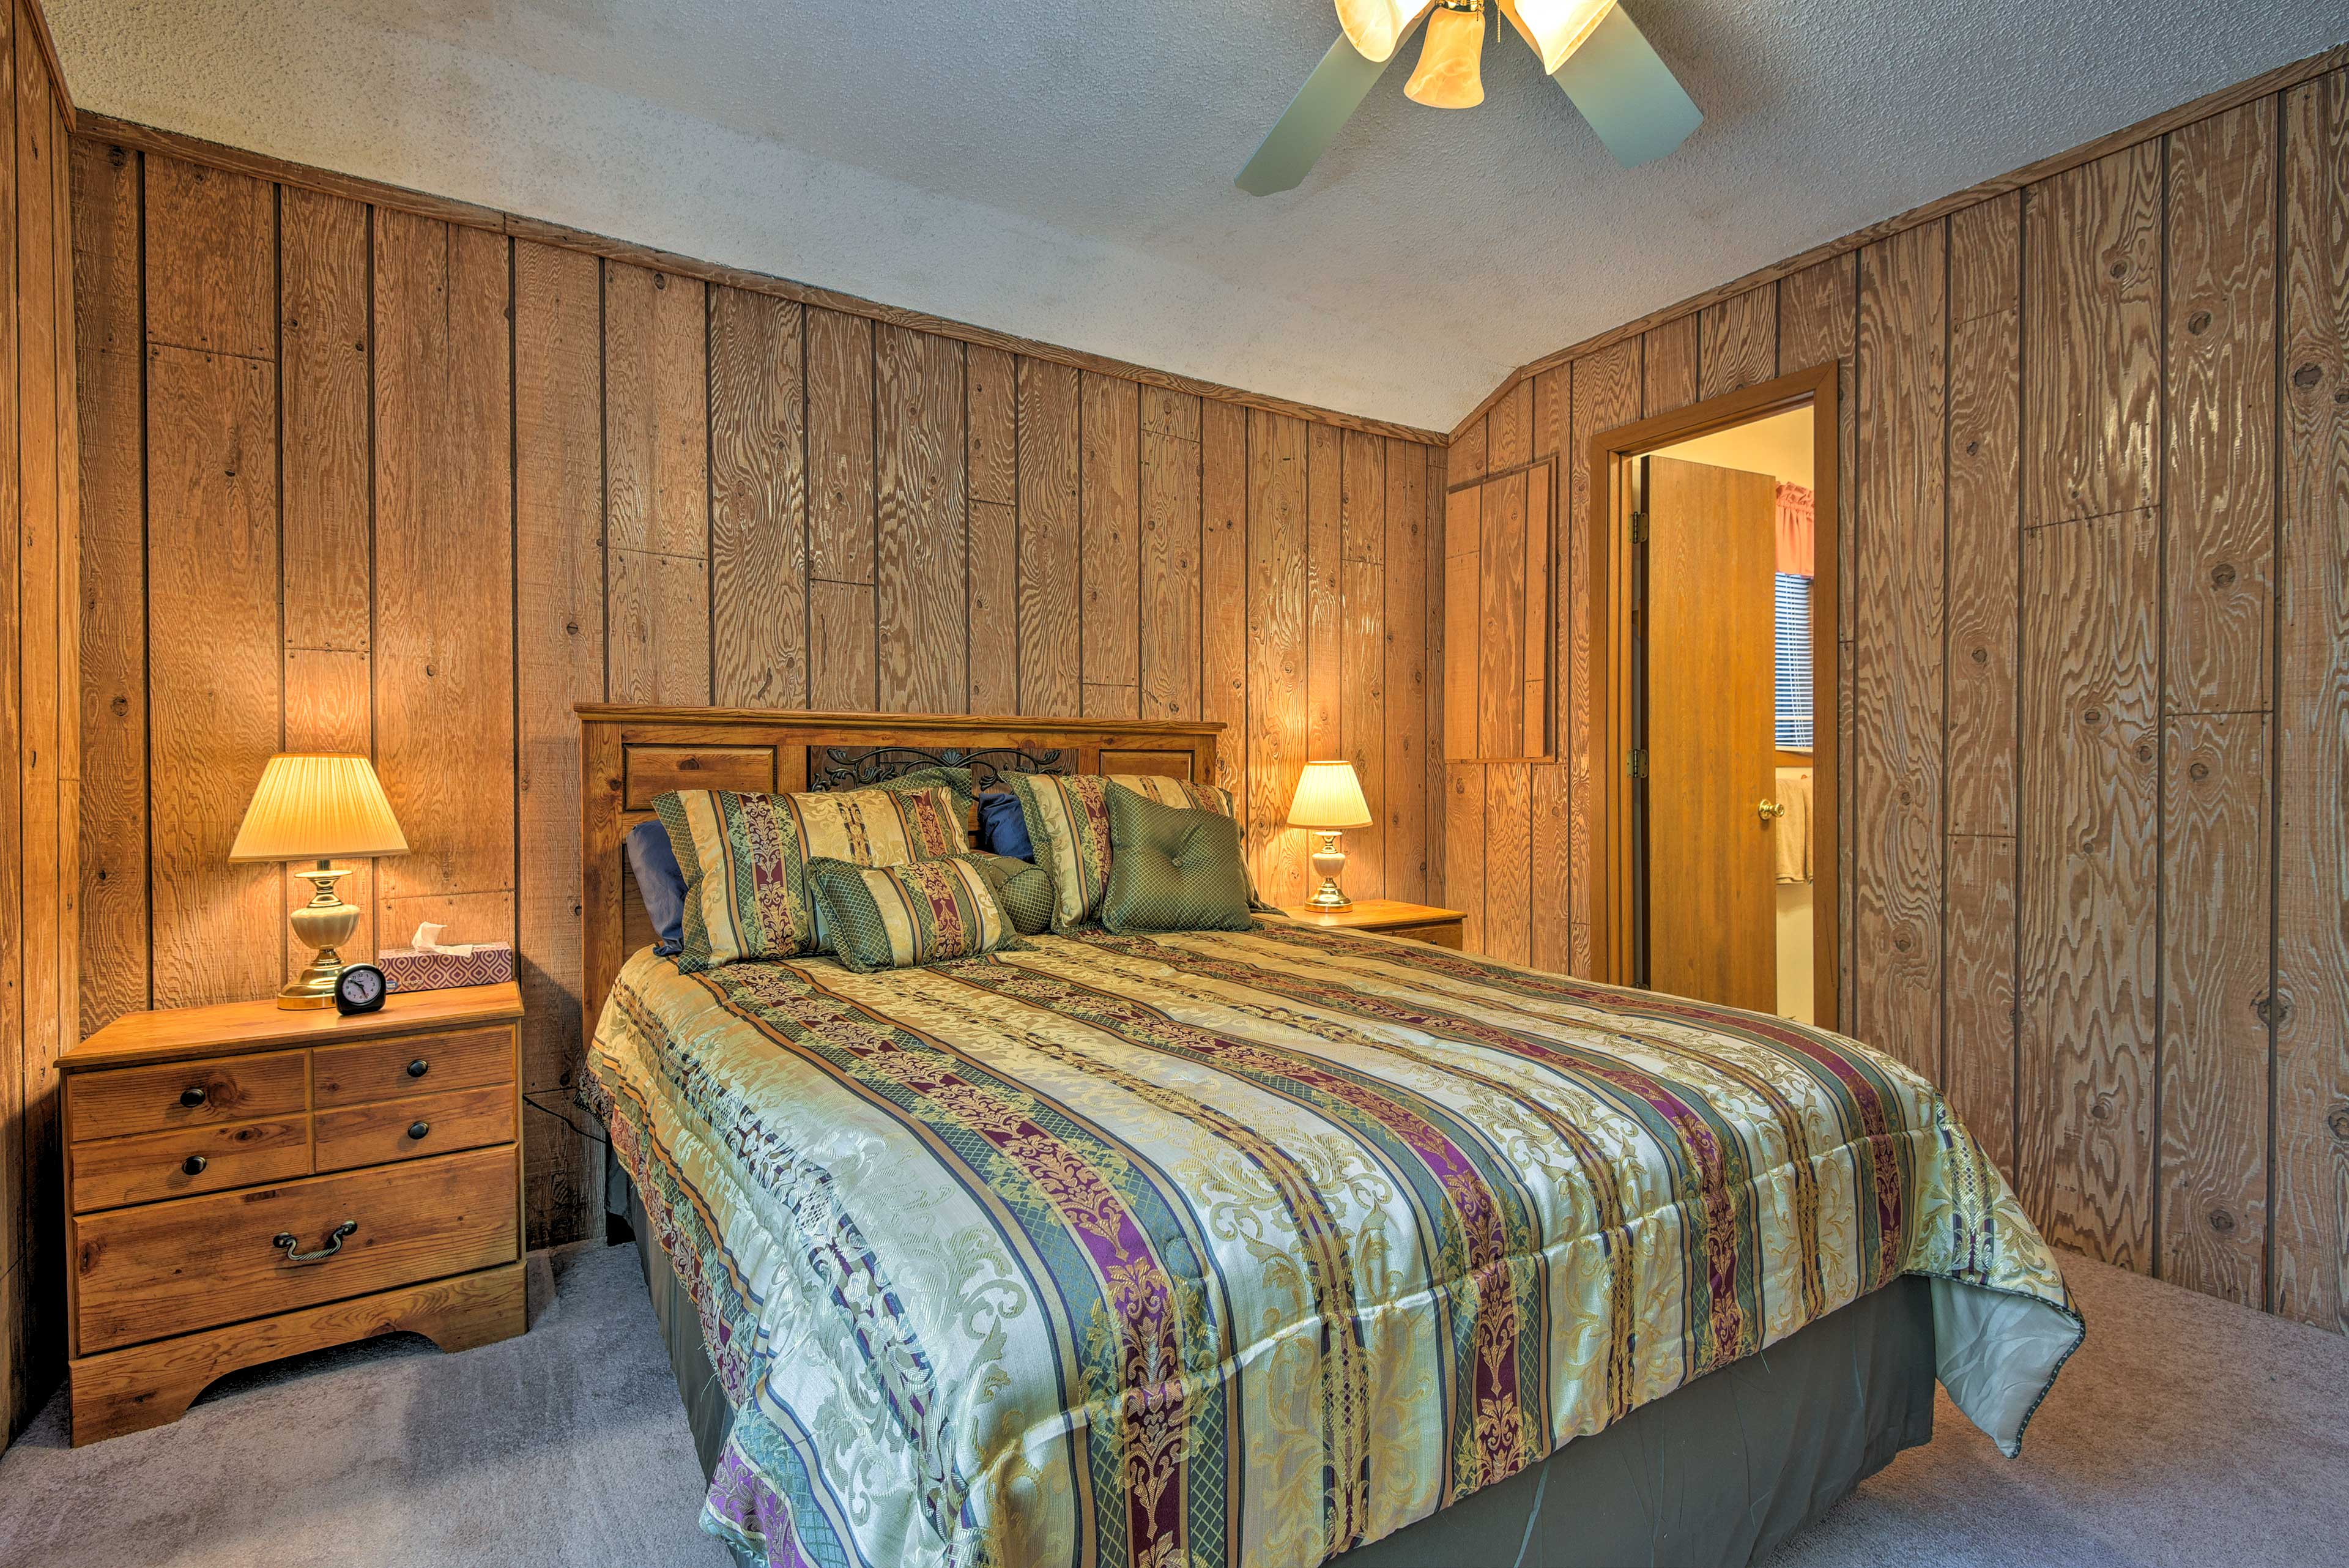 Two guests will sleep soundly in this queen bed.